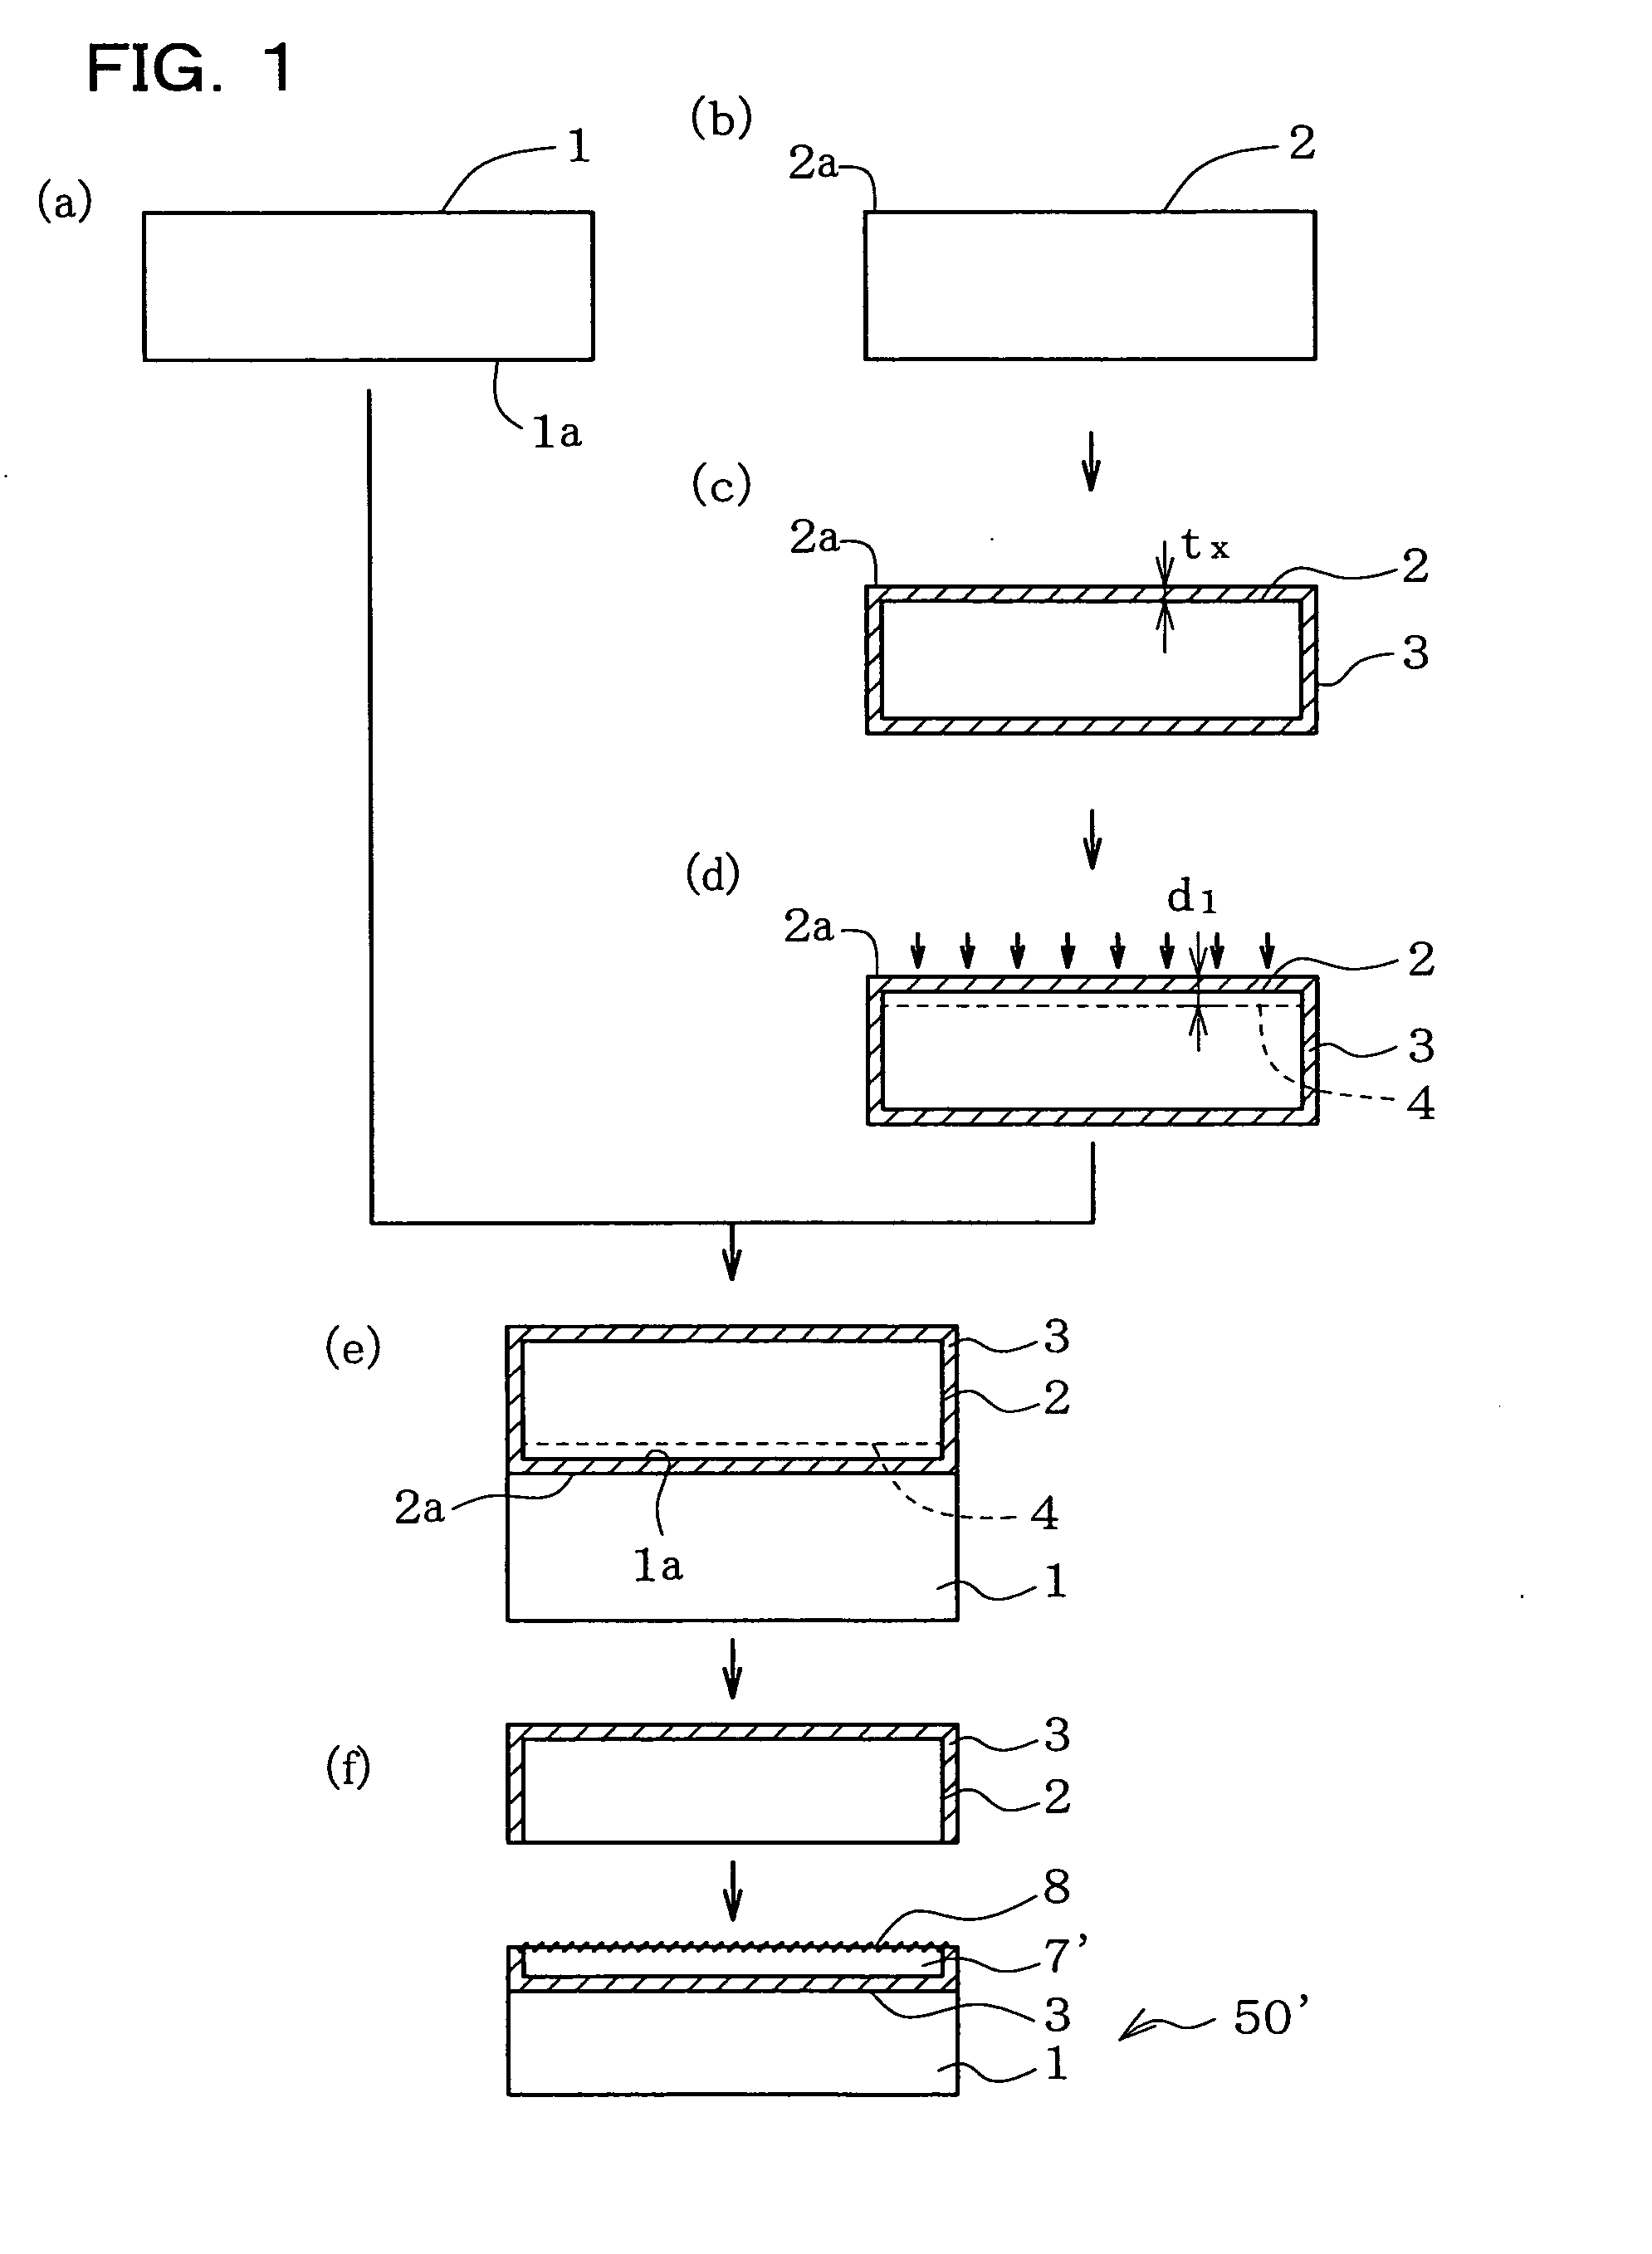 Production method for soi wafer